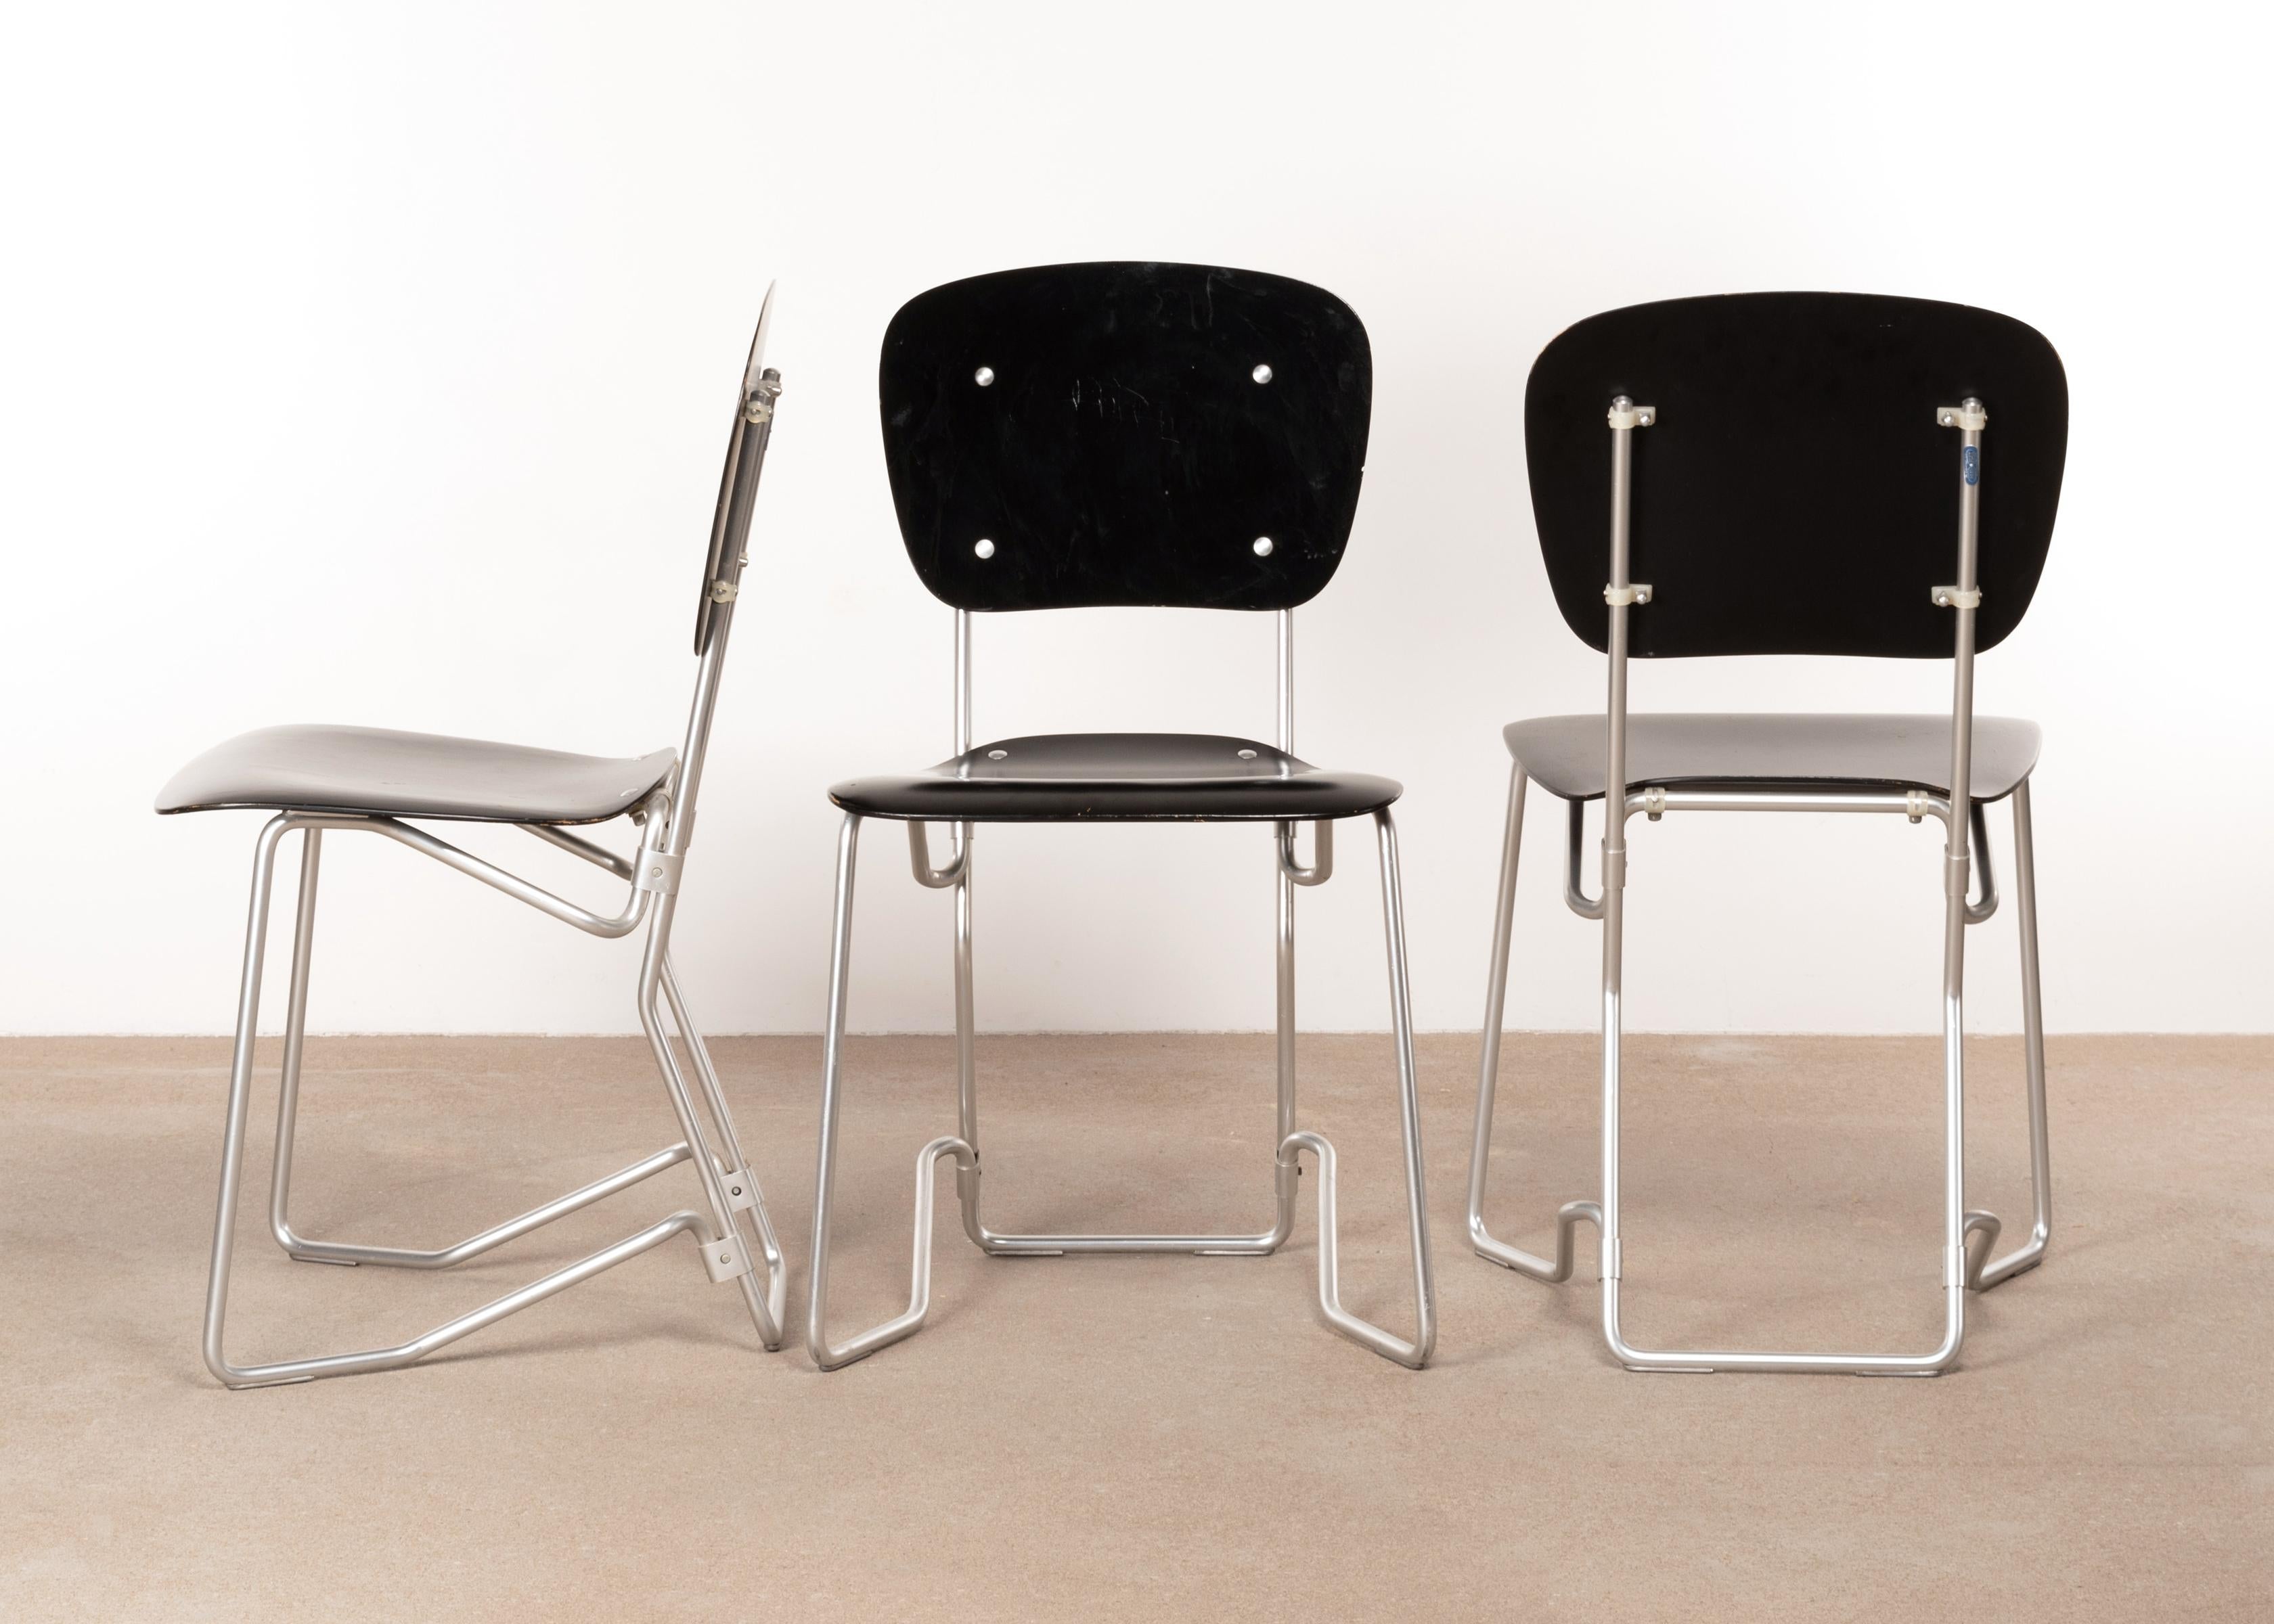 Mid-20th Century Armin Wirth Early Folding Stacking Chair in Black Plywood / Aluminum for Aluflex